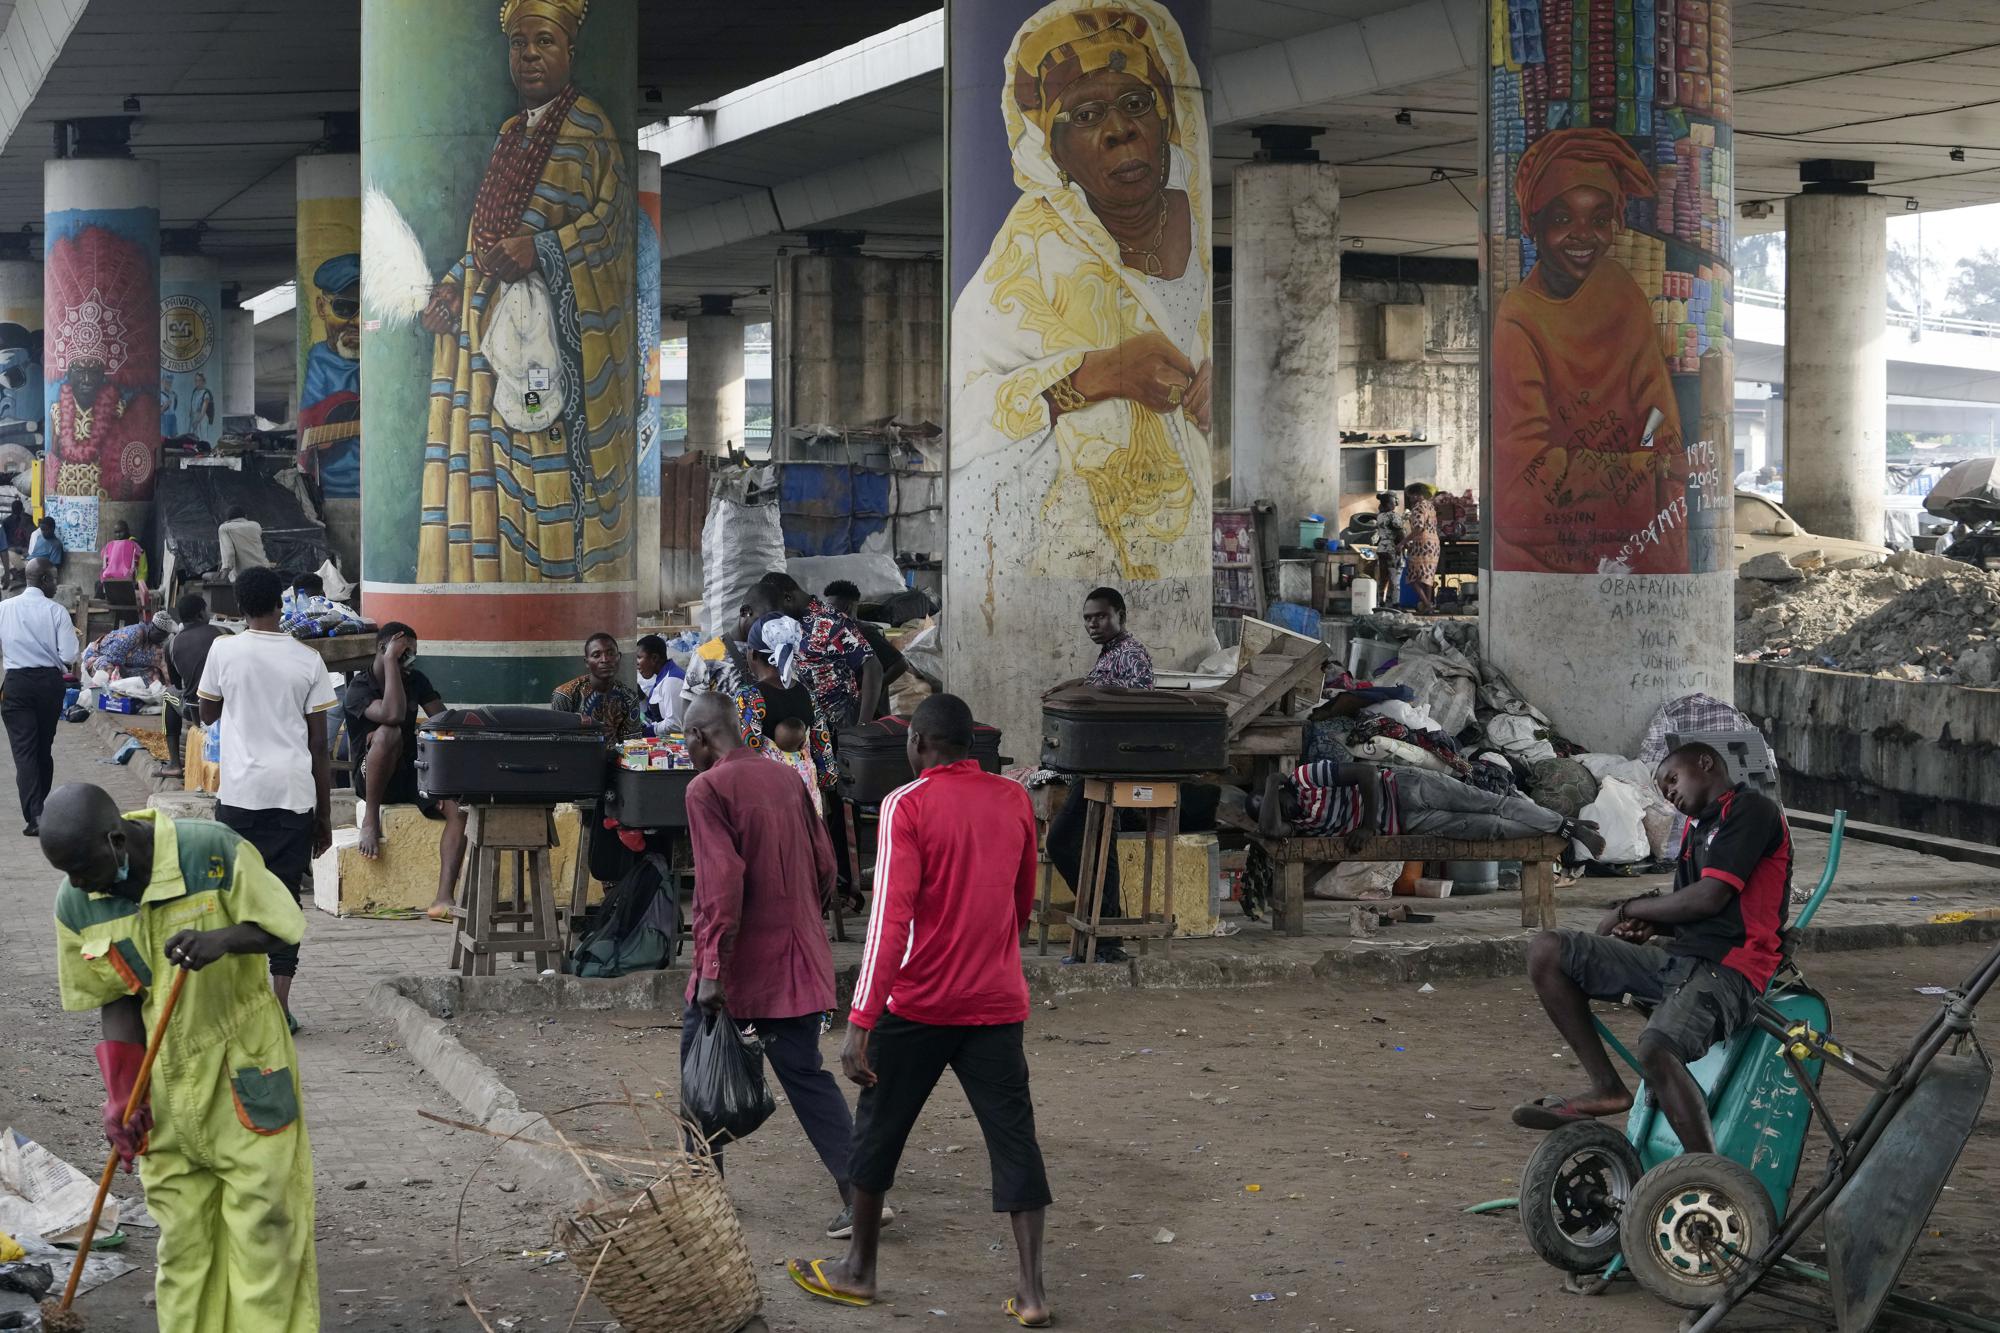 People walk during rush hours in Lagos, Nigeria, Monday, Nov. 14, 2022. The world's population is projected to hit an estimated 8 billion people on Tuesday, Nov. 15, according to a United Nations projection, with much of the growth coming from developing nations in Africa. (AP Photo/Sunday Alamba)